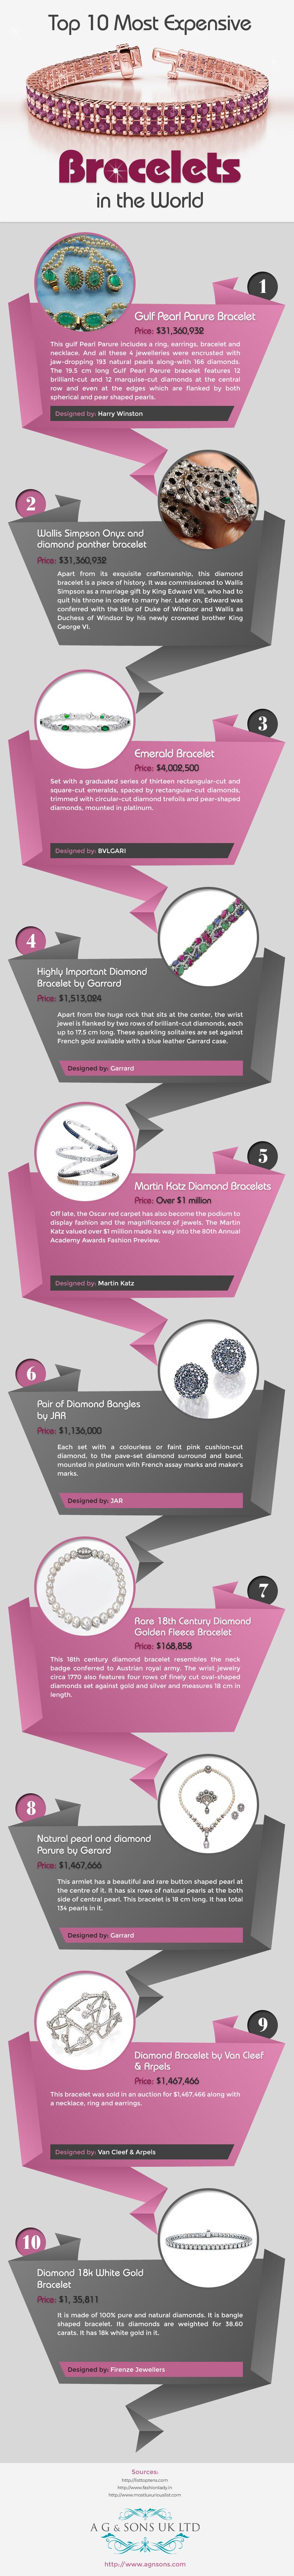 Wedding - Top 10 Most Expensive Bracelets in the World